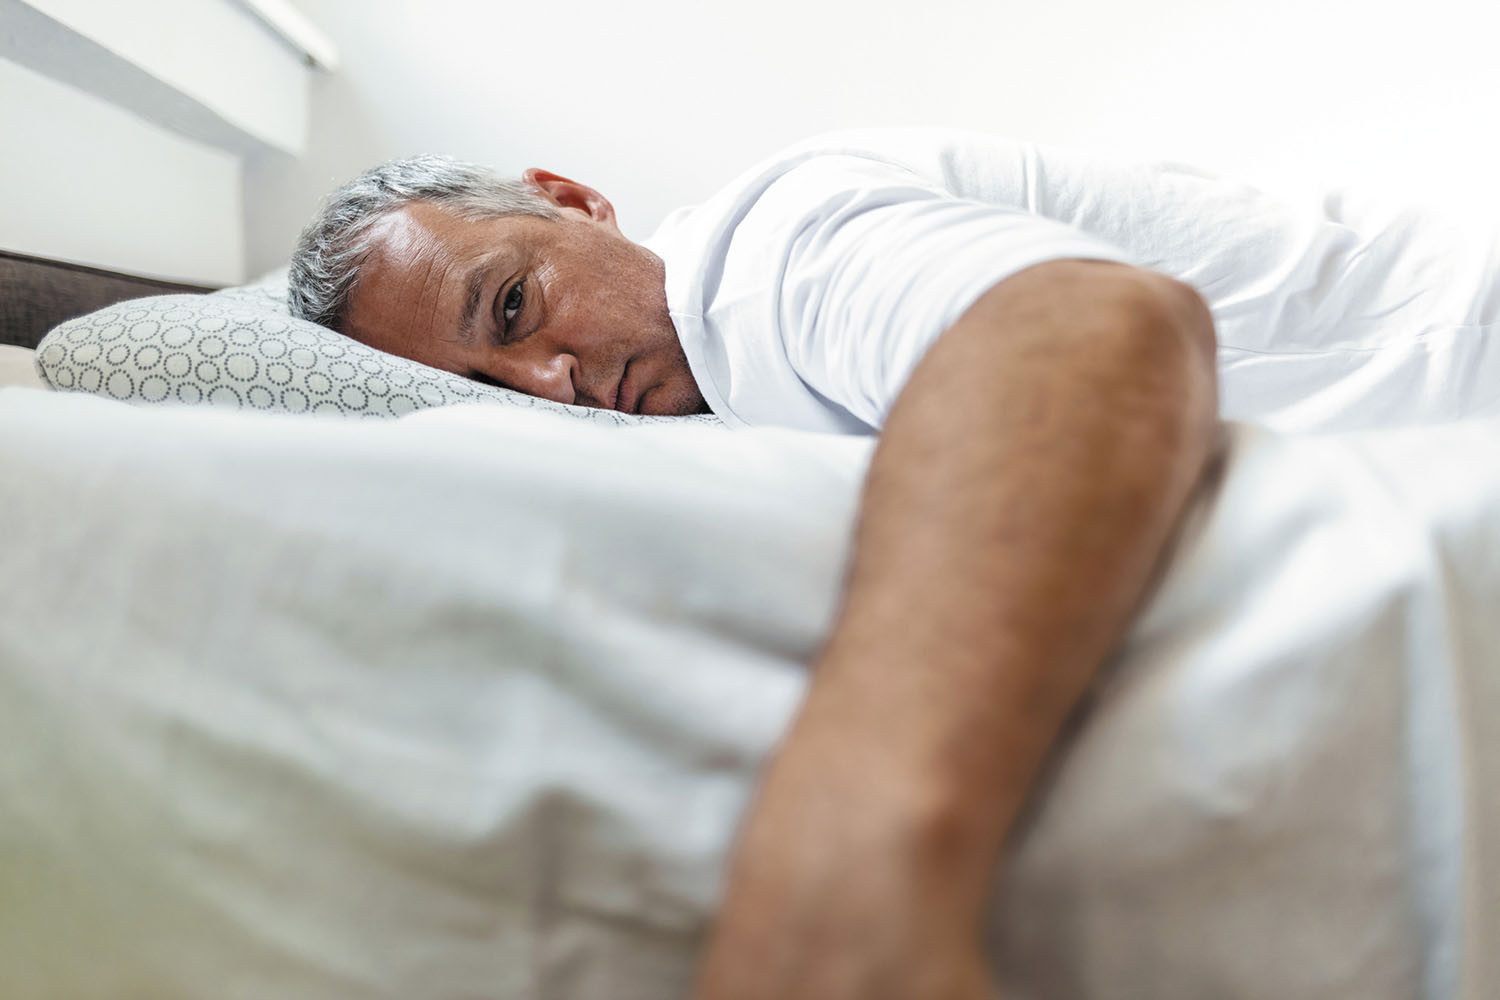 photo of a man awake in bed, unable to fall asleep